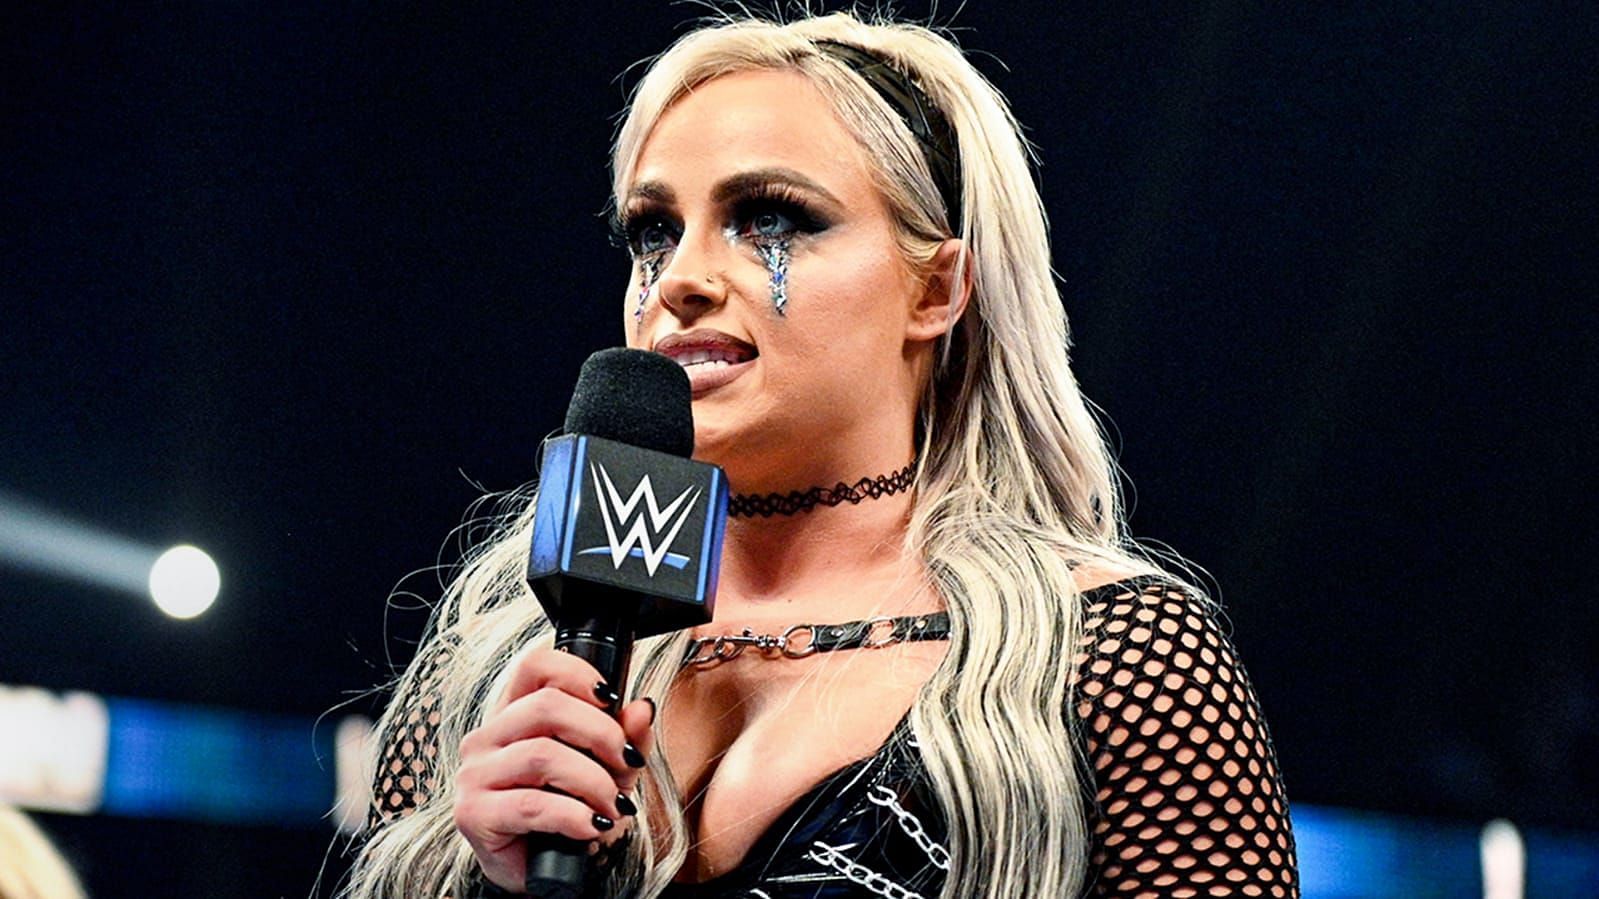 Liv Morgan competed in a Fatal-Four Way match against Bliss, Ripley and Doudrop